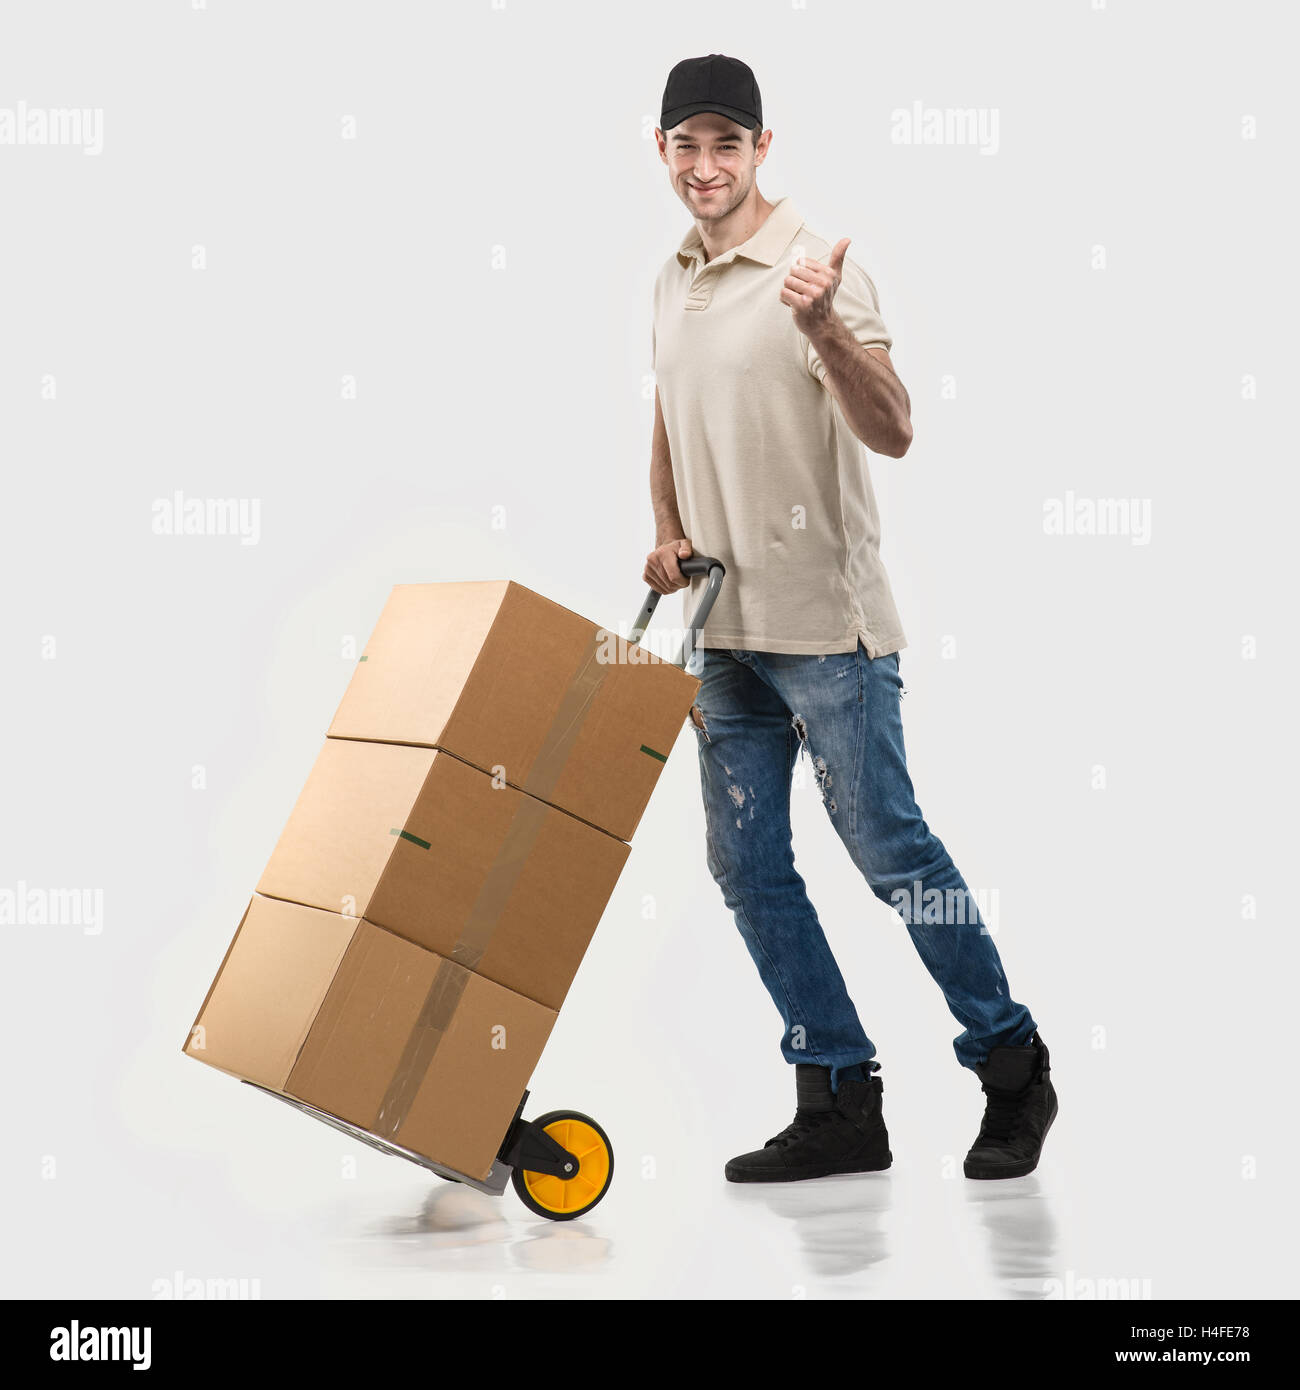 Courier - a handcart packages Stock Photo